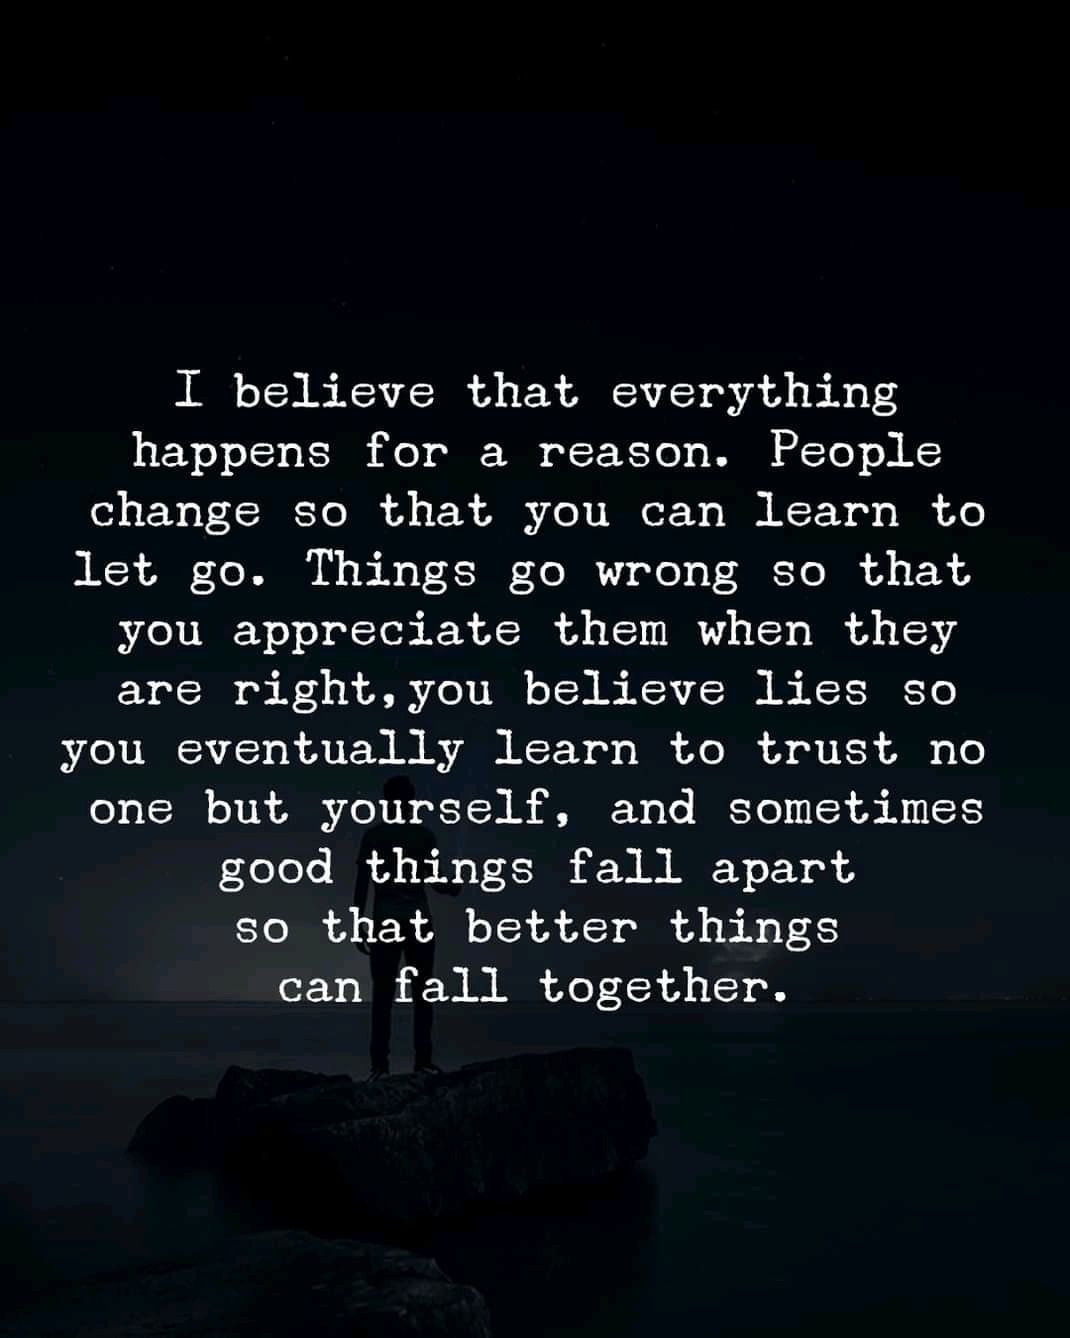 I believe that everything happens for a reason. People change so that you can learn to let go, things go wrong so that you appreciate them when they’re right, you believe lies so you eventually learn to trust no one but yourself, and sometimes good things fall apart so better things can fall together.